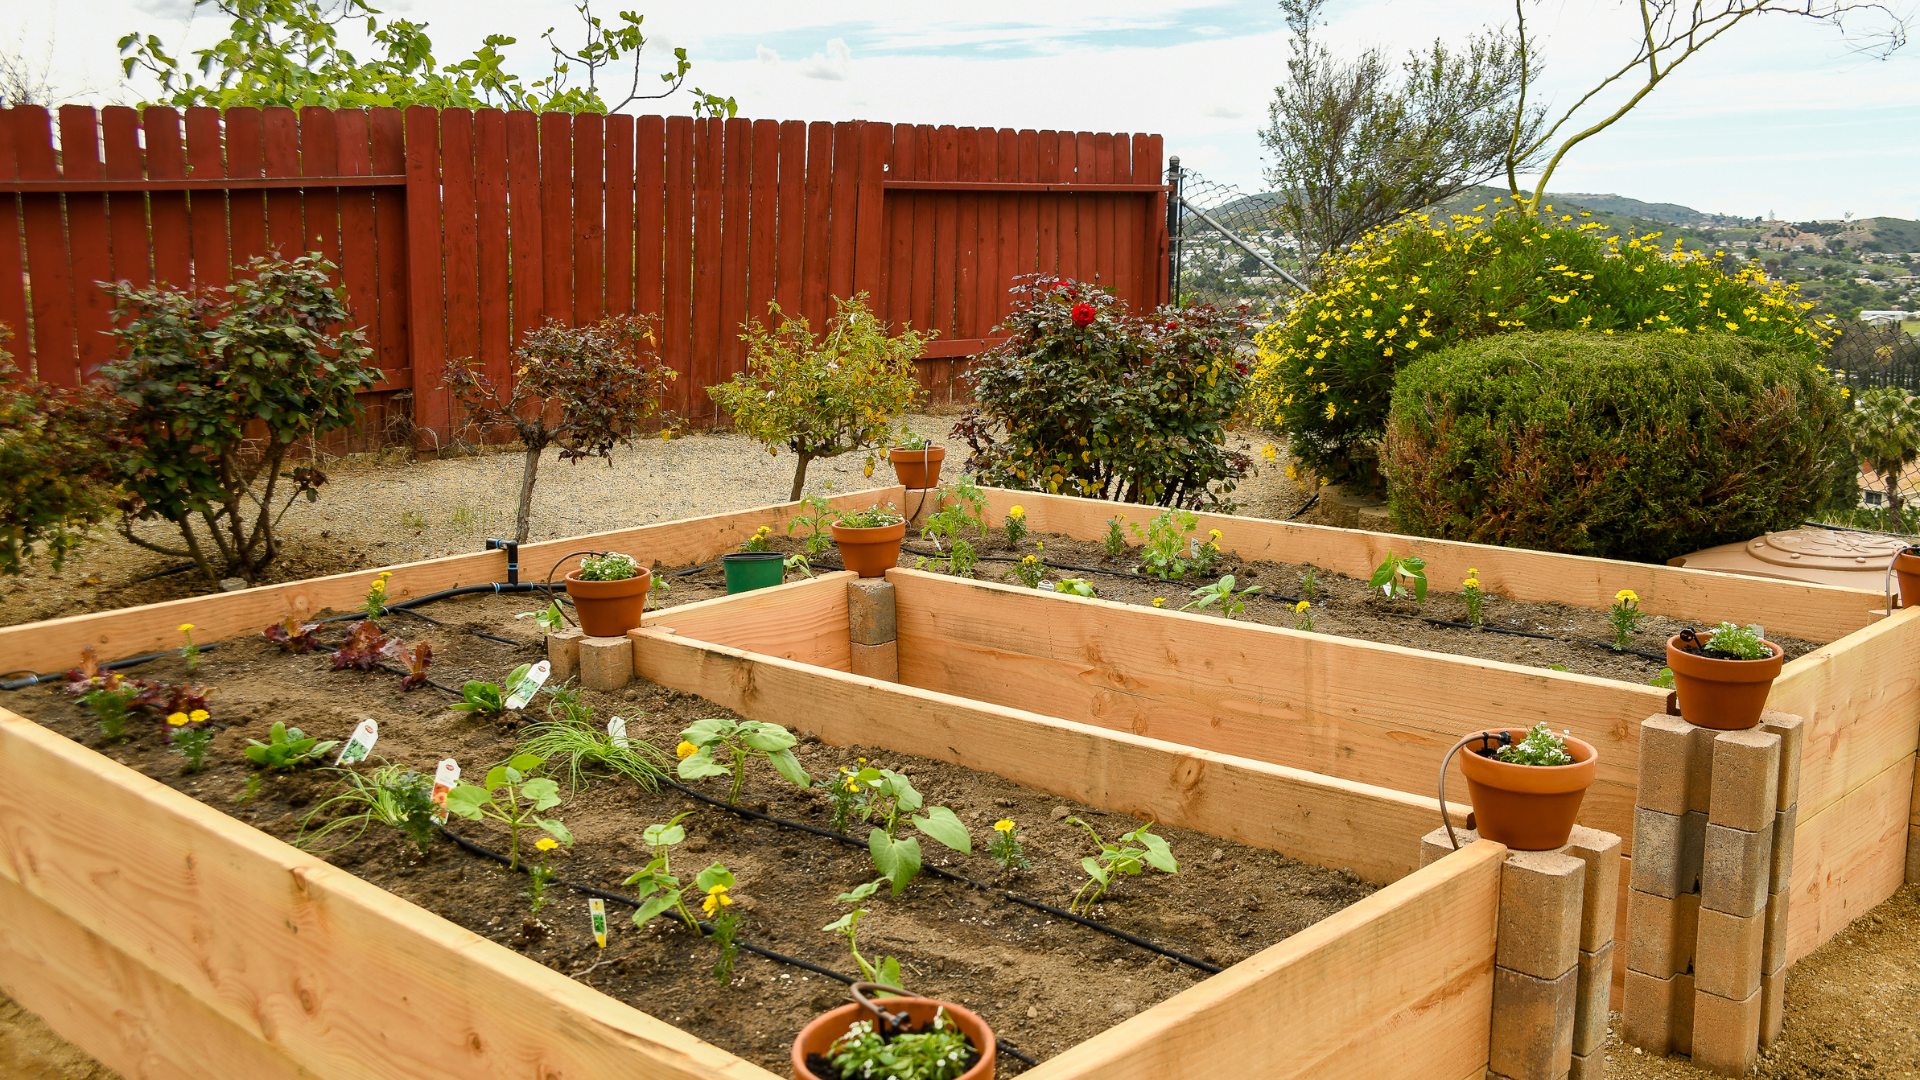 A U-shaped raised garden bed made of yellow wood...